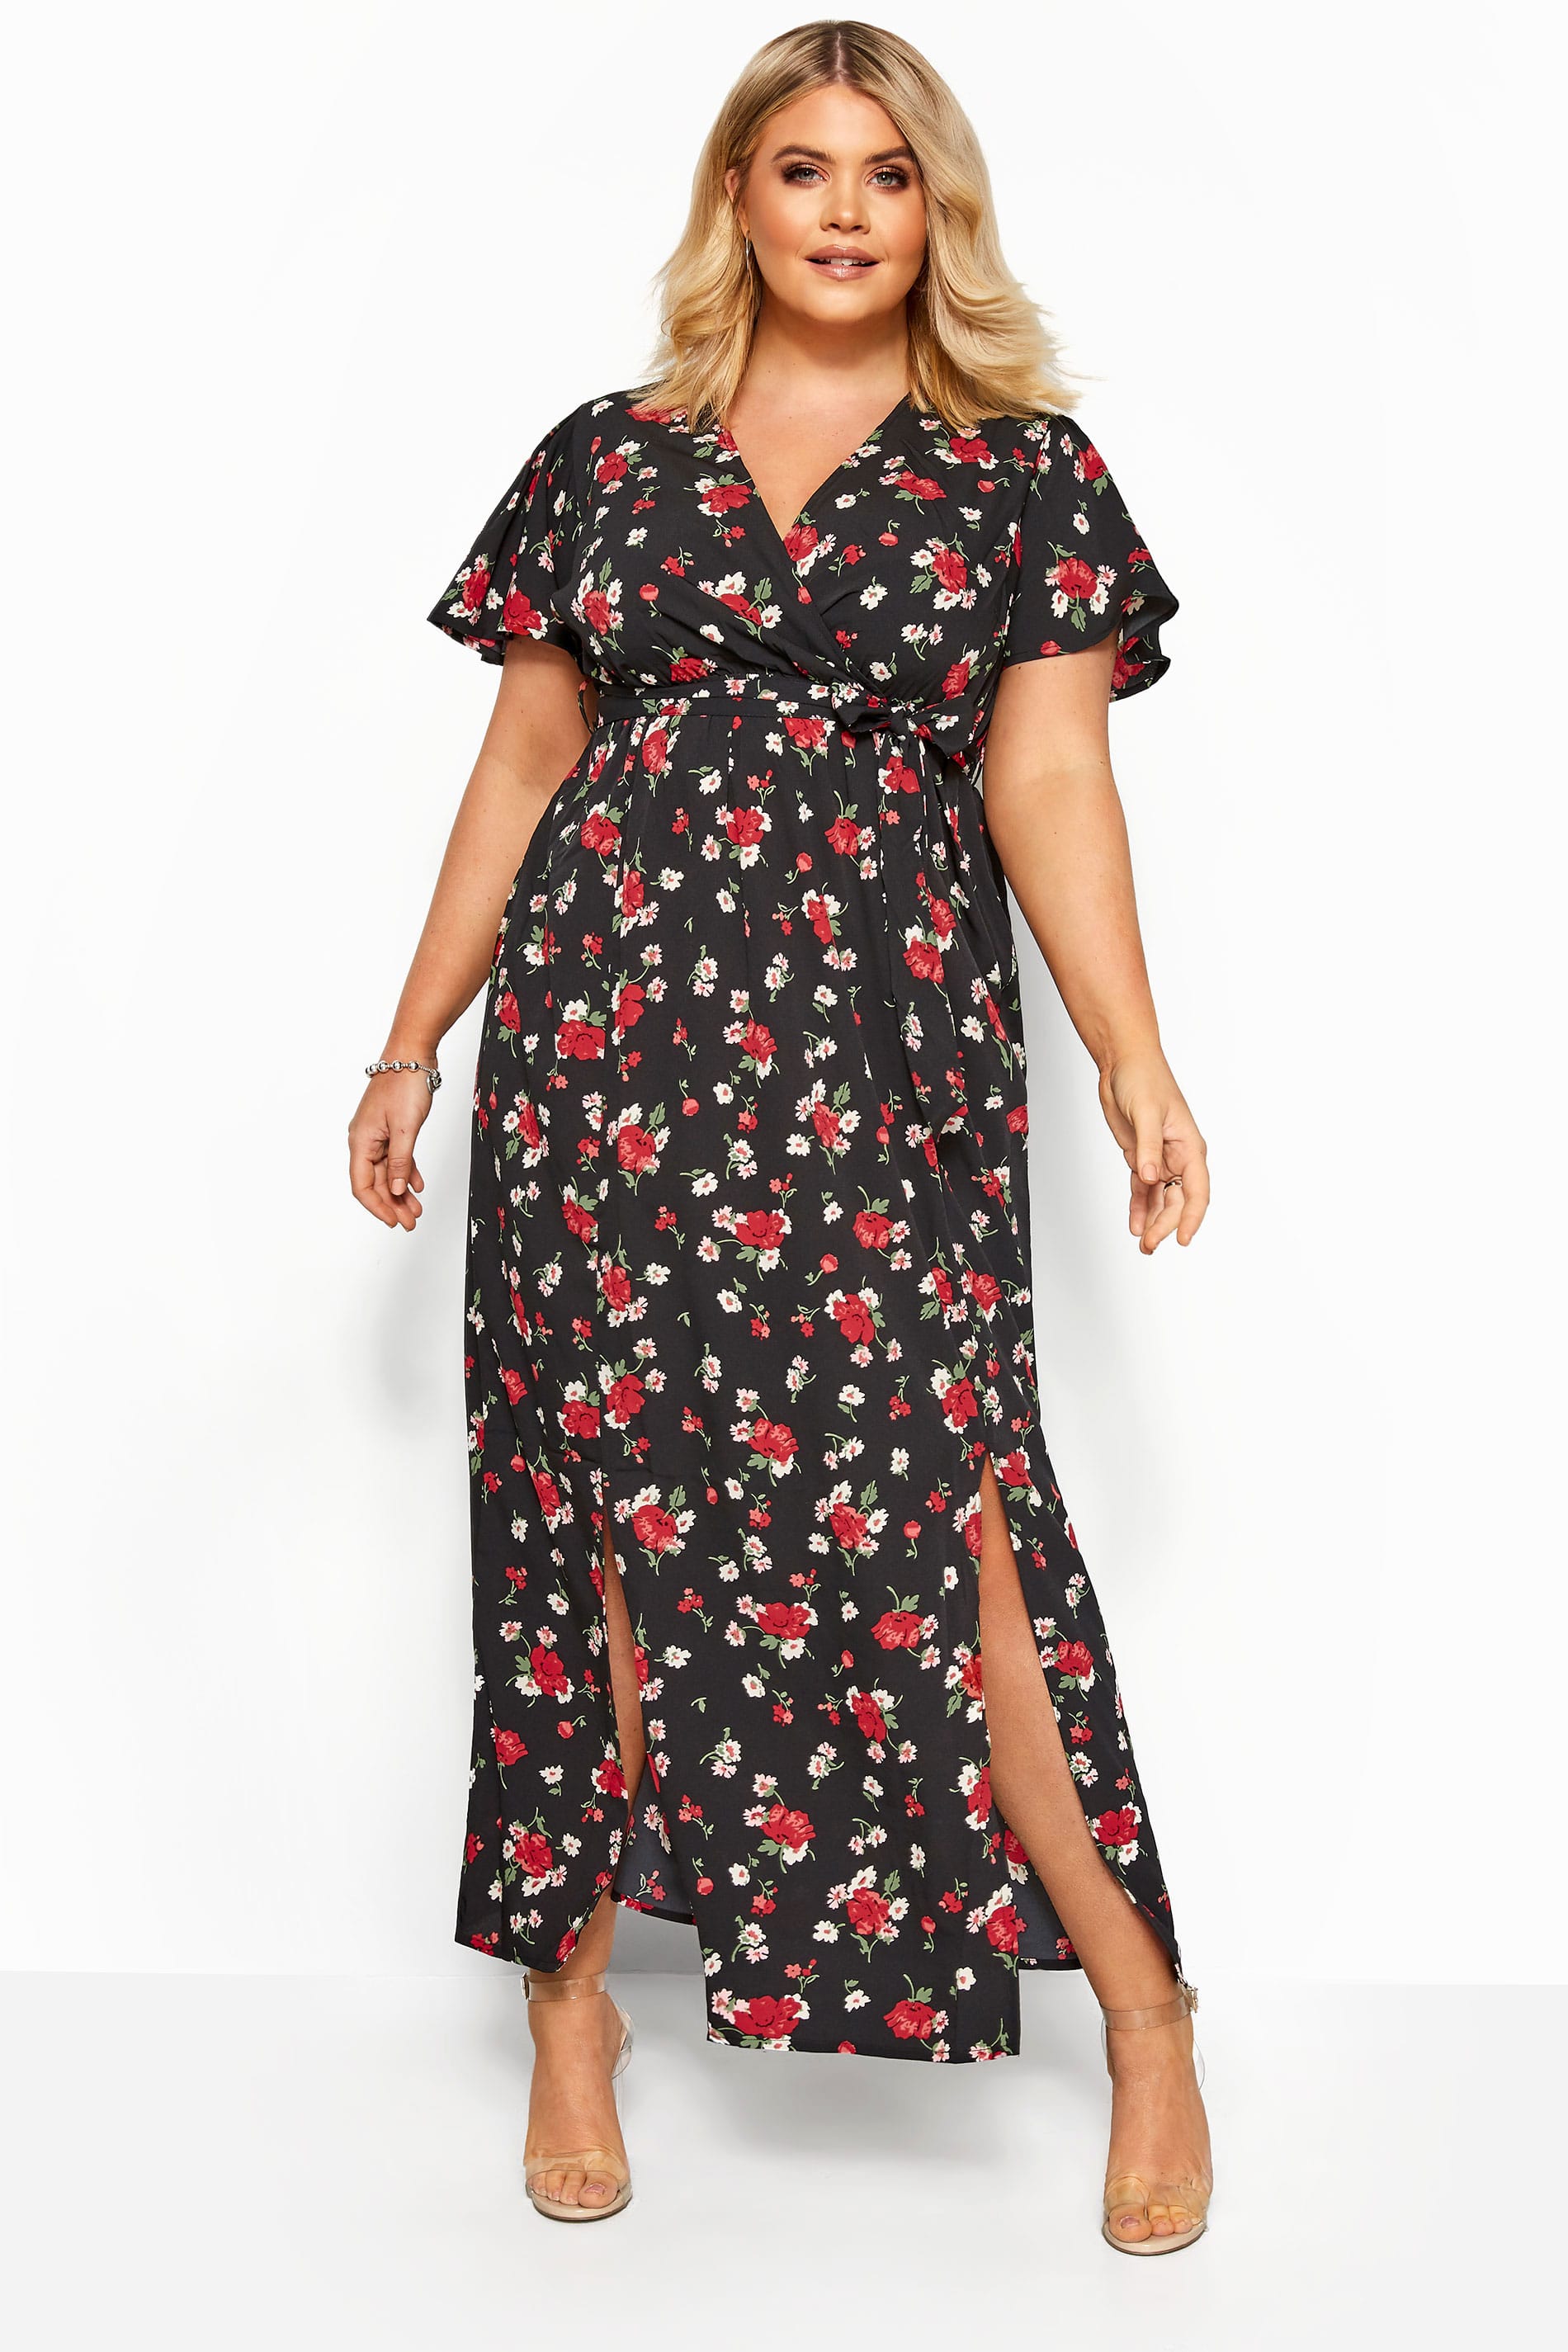 Black Floral Wrap Maxi Dress Yours Clothing